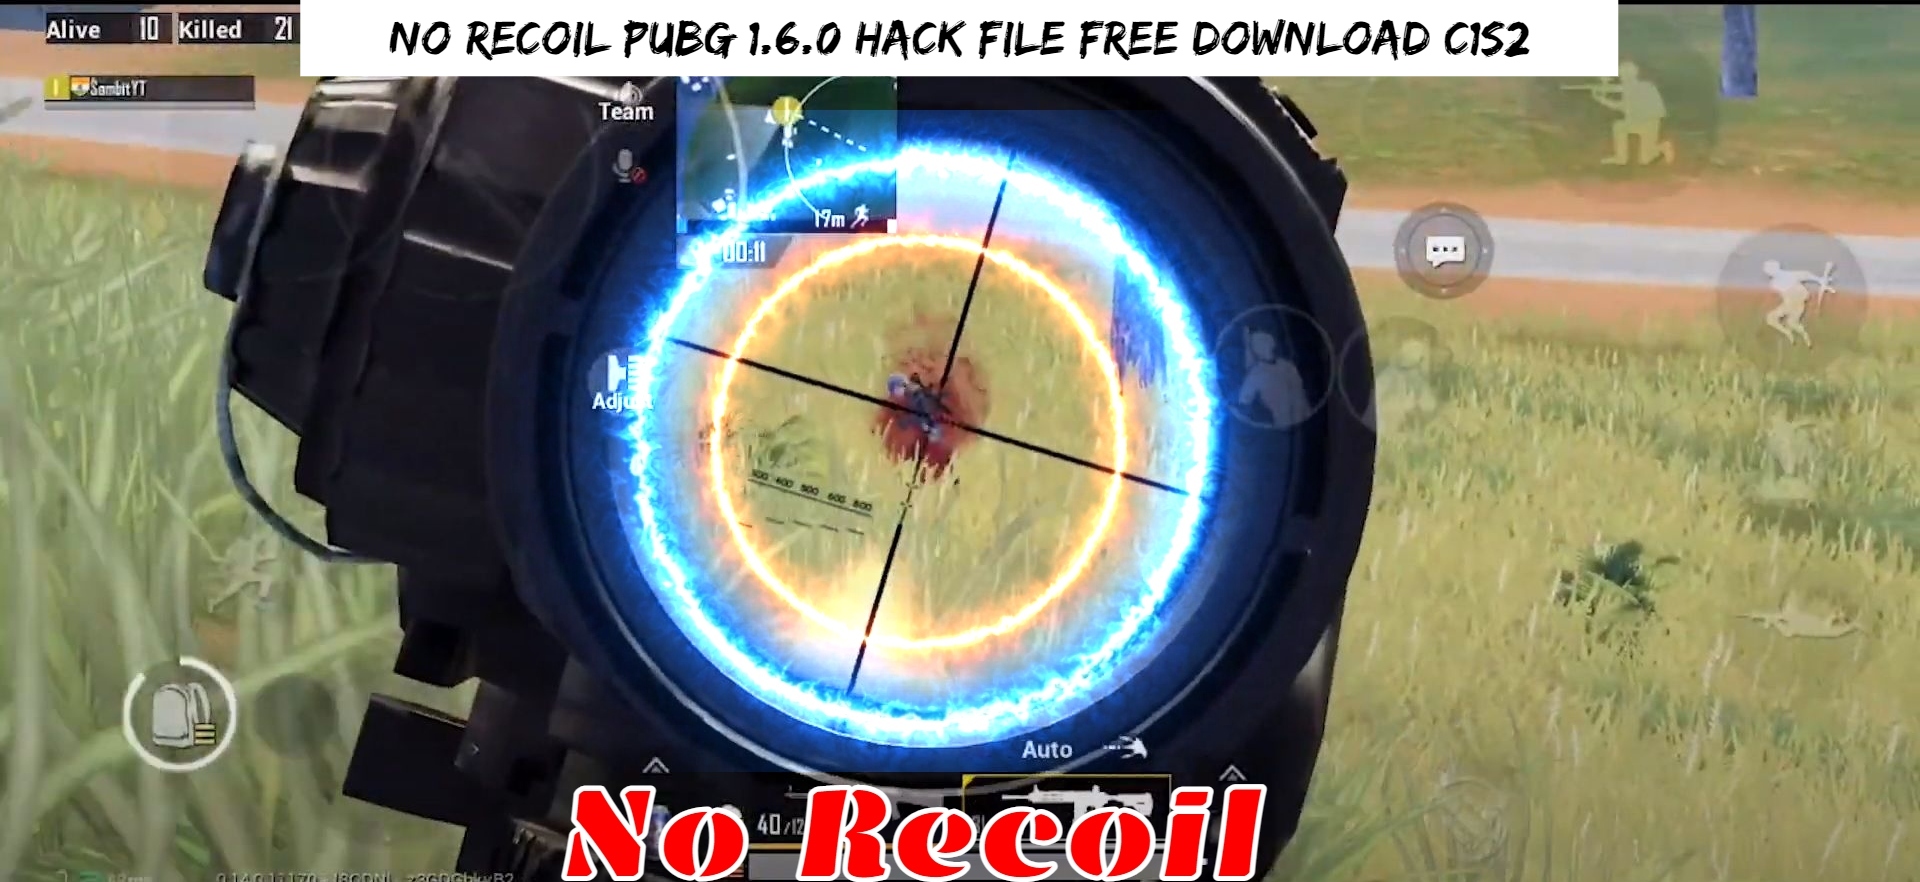 You are currently viewing No Recoil PUBG 1.6.0 Hack File Free Download C1S2